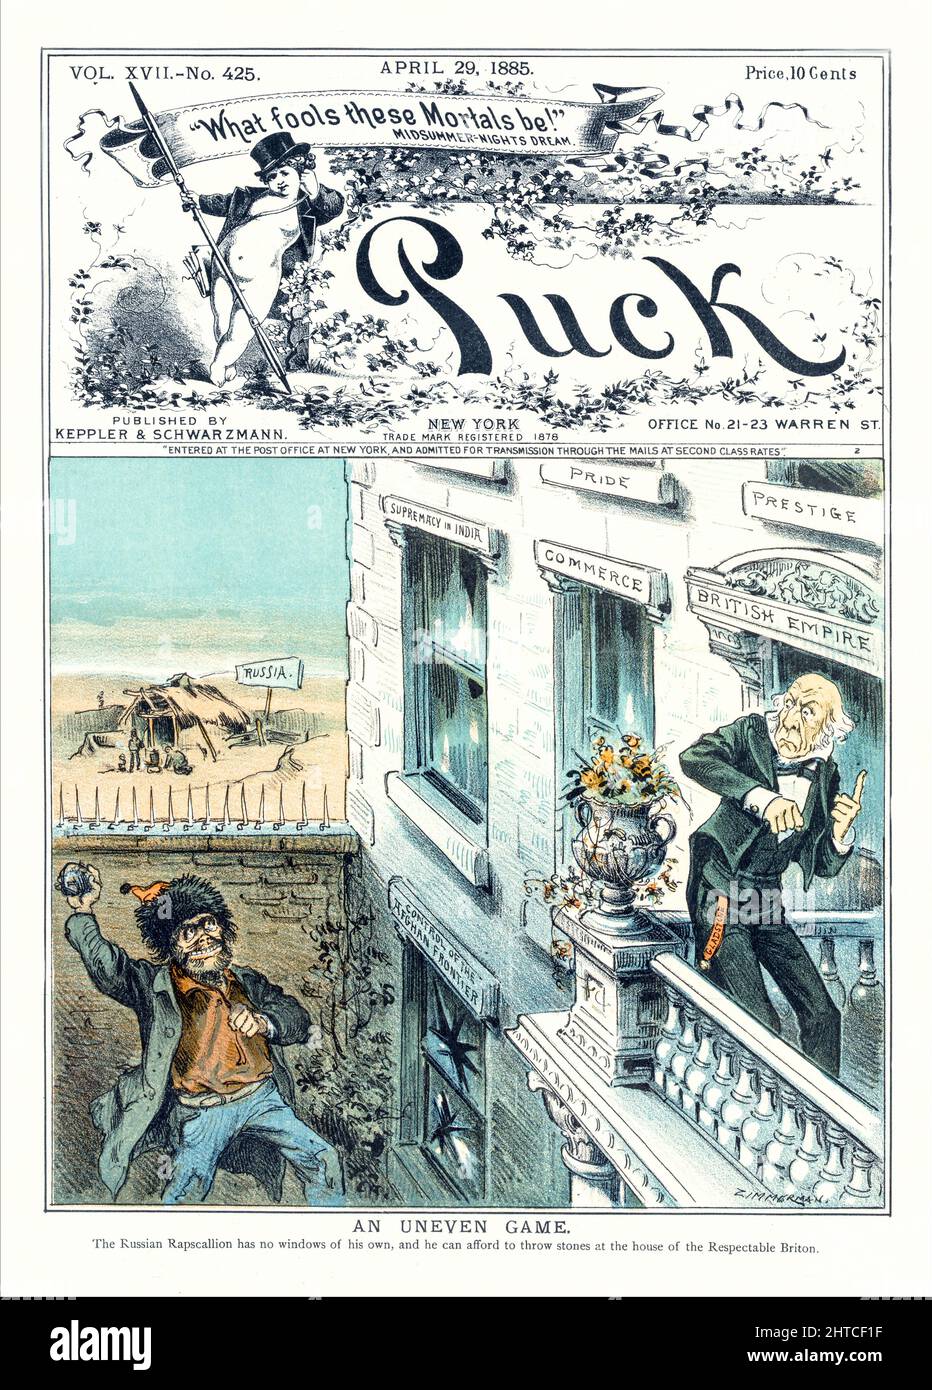 A late 19th century American Puck Magazine illustration showing William E. Gladstone standing on the balcony of a building where the windows are labelled 'Pride, Prestige, Supremacy in India, Commerce, British Empire and  Control of the Afgan Frontier' (which is above two broken windows). Below is a thug identified as a 'Russian Rapscallion' who is about to throw a rock at 'Gladstone' and the 'British Empire'. In the background is a wretched hovel labeled 'Russia'. Stock Photo